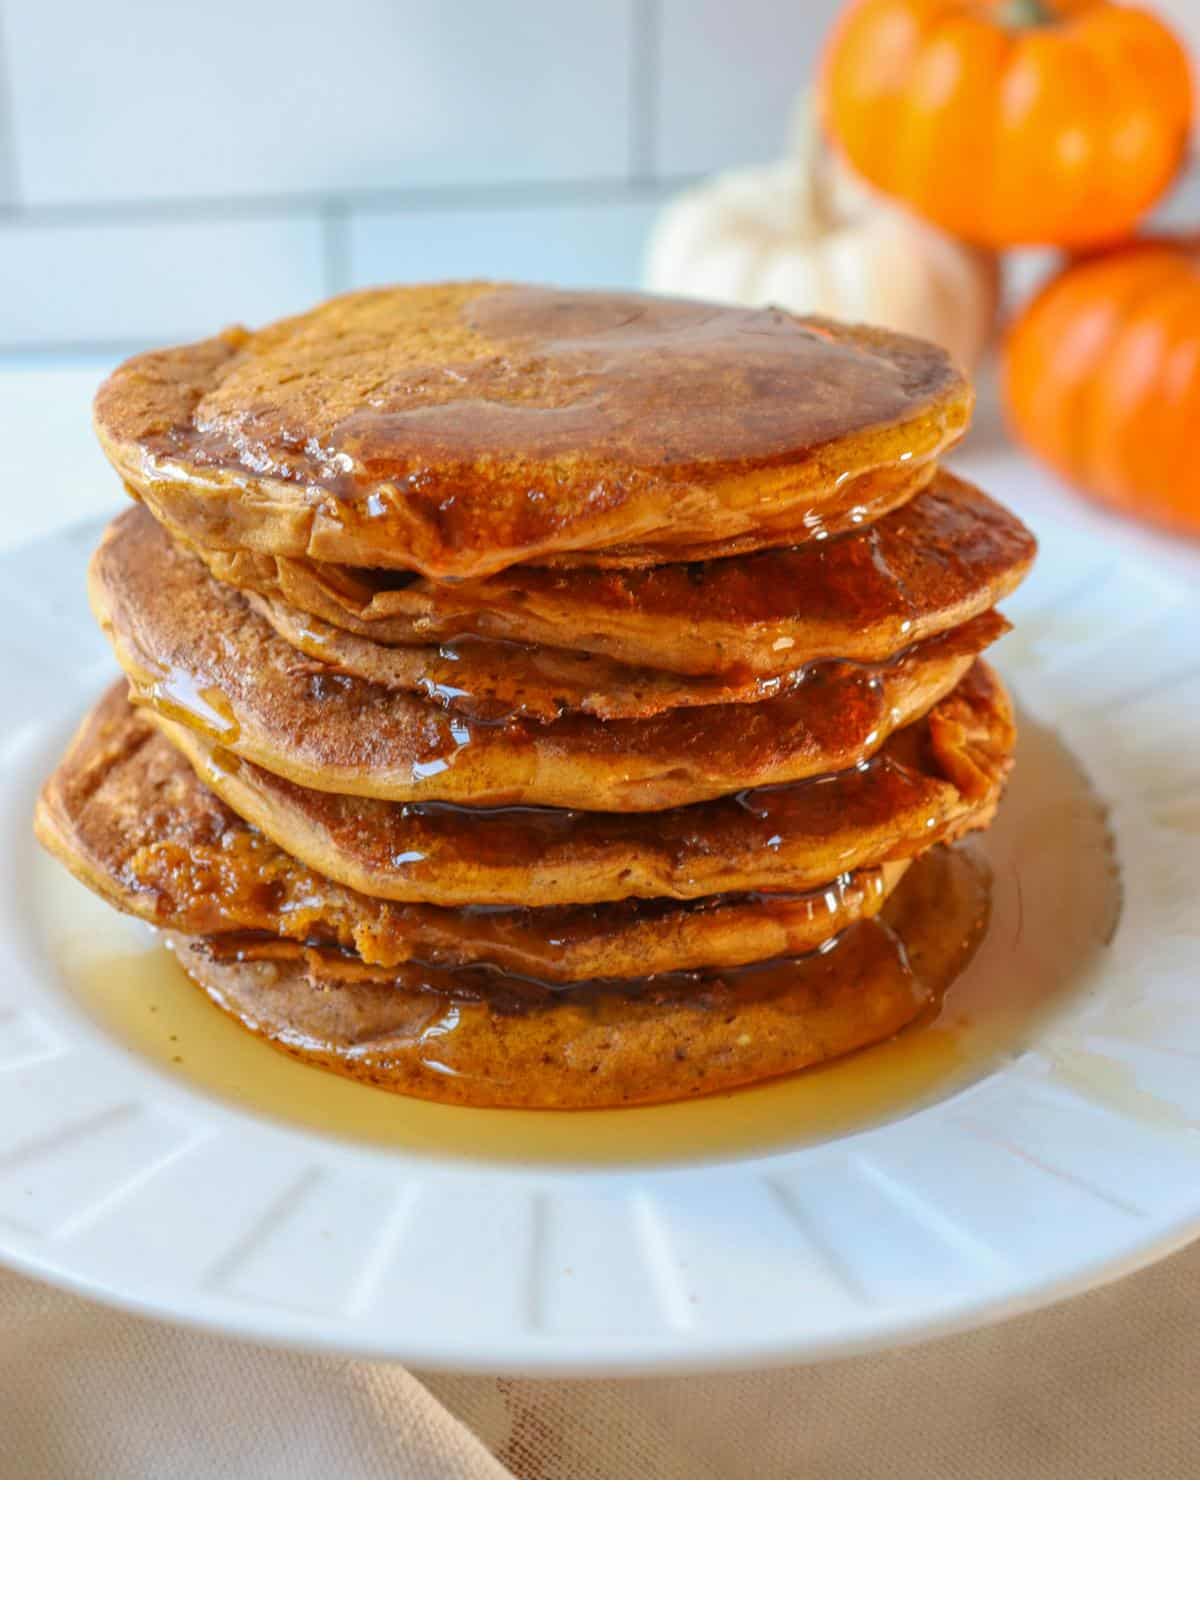 Egg free dairy free pumpkin pancakes stacked up on a white plate next to mini pumpkins.